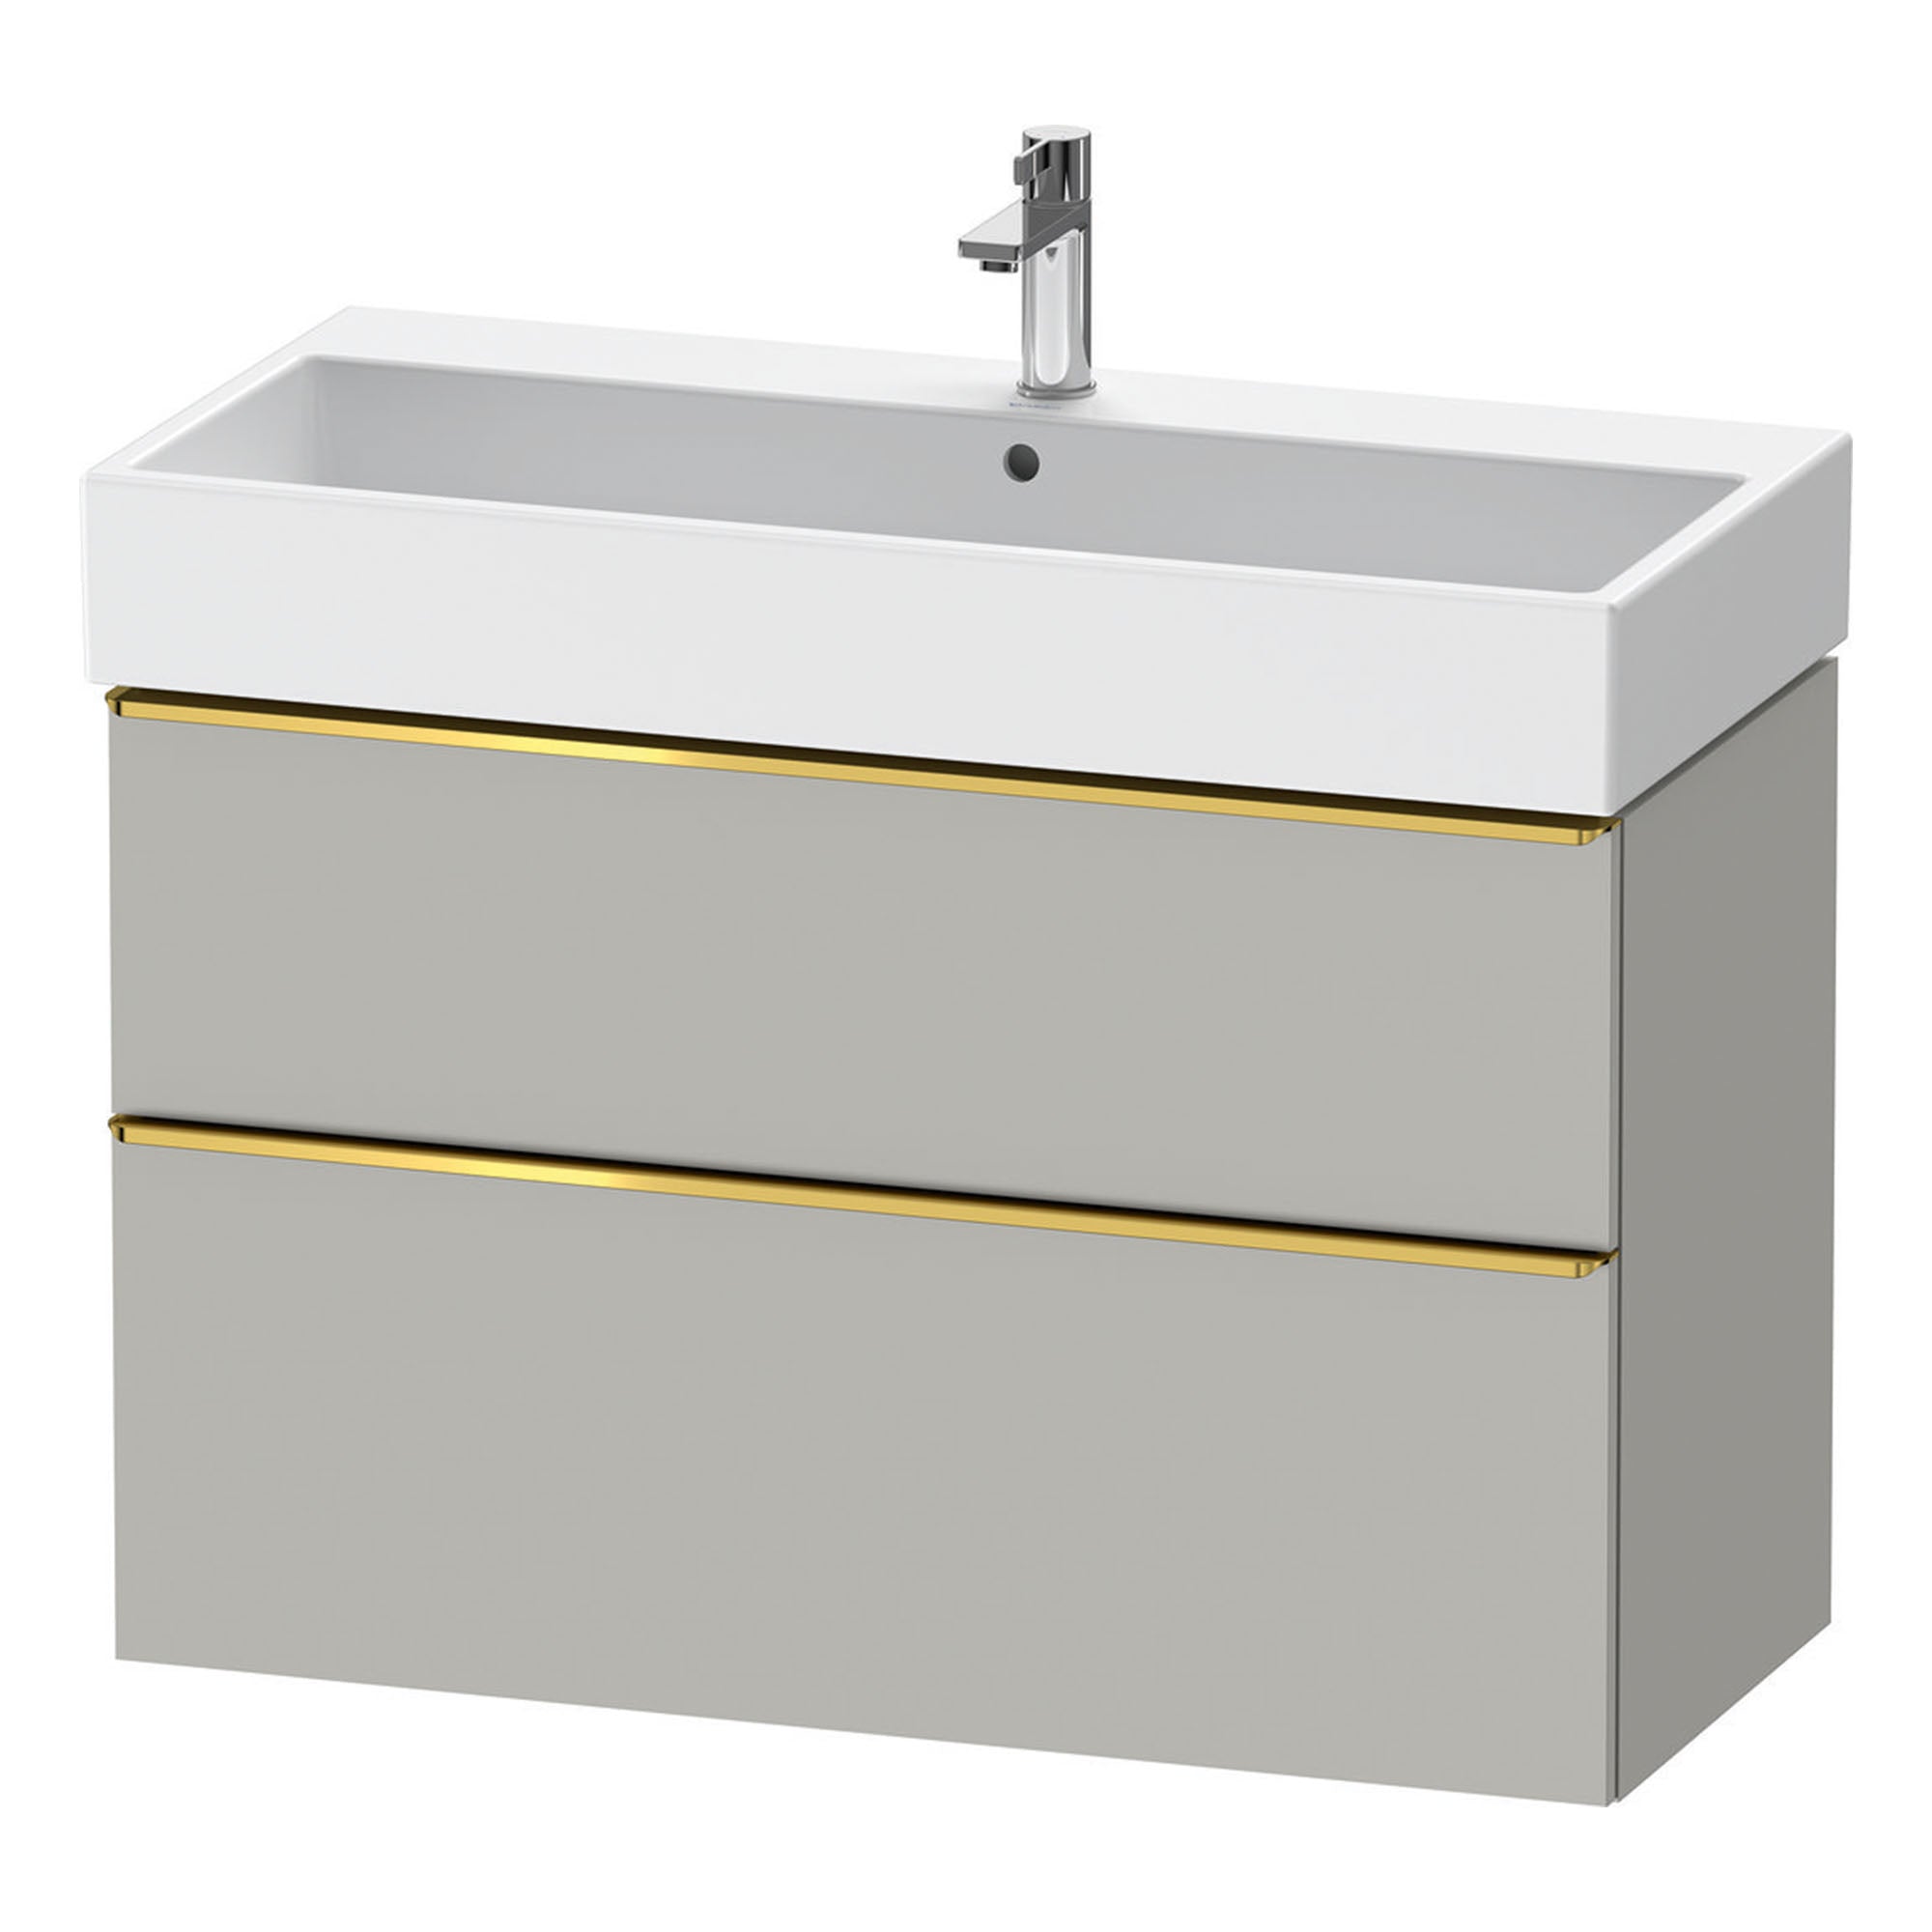 duravit d-neo 1000 wall mounted vanity-unit with vero basin concrete grey stainless steel handles